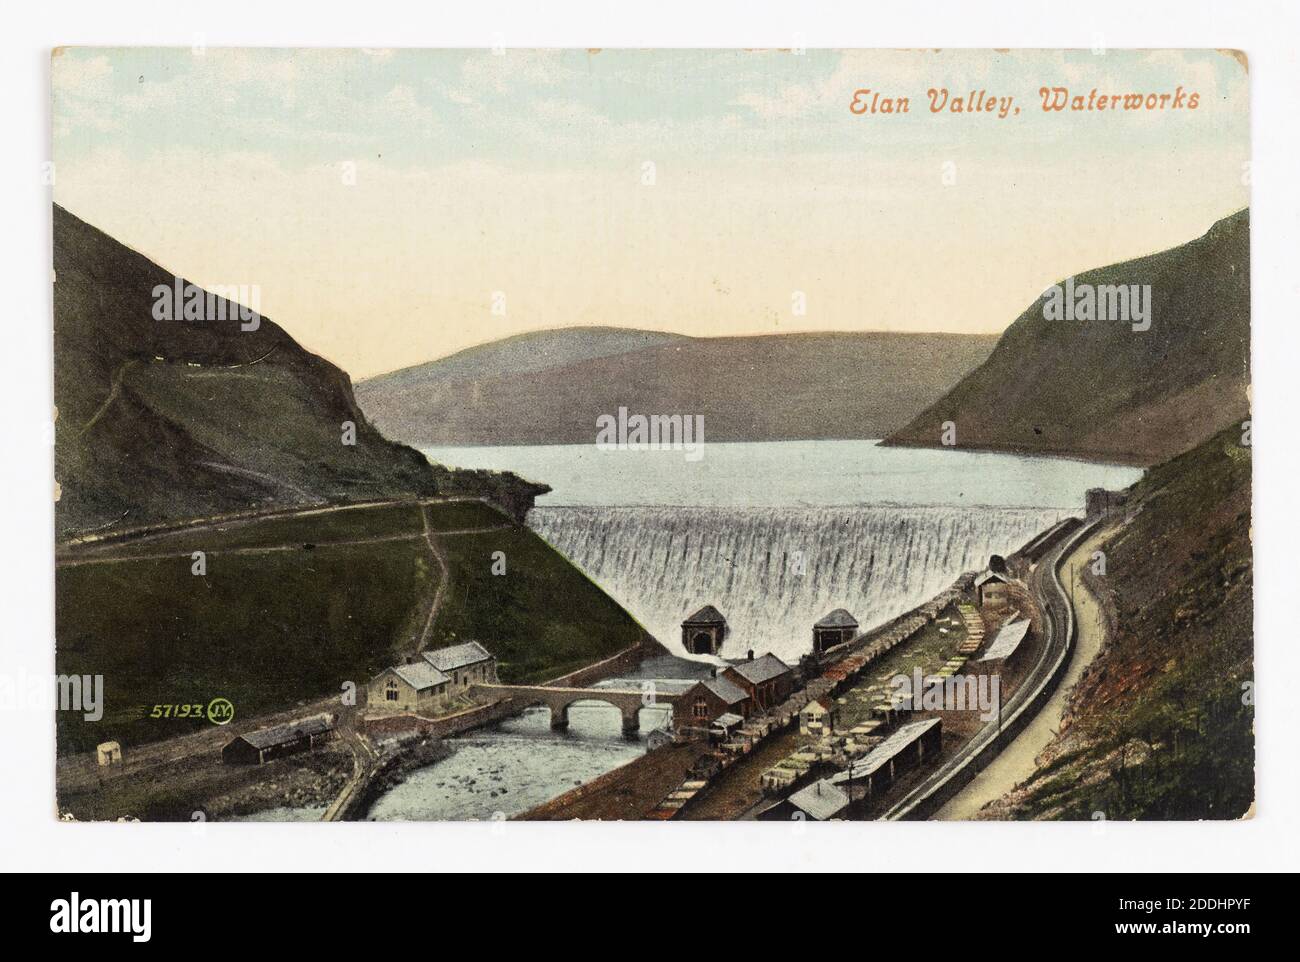 Postcard, Birmingham Waterworks, Elan Valley, Wales, 1908, Topographical Views, View of Caban Dam and reservoir supplying the city of Birmingham with drinking water Stock Photo